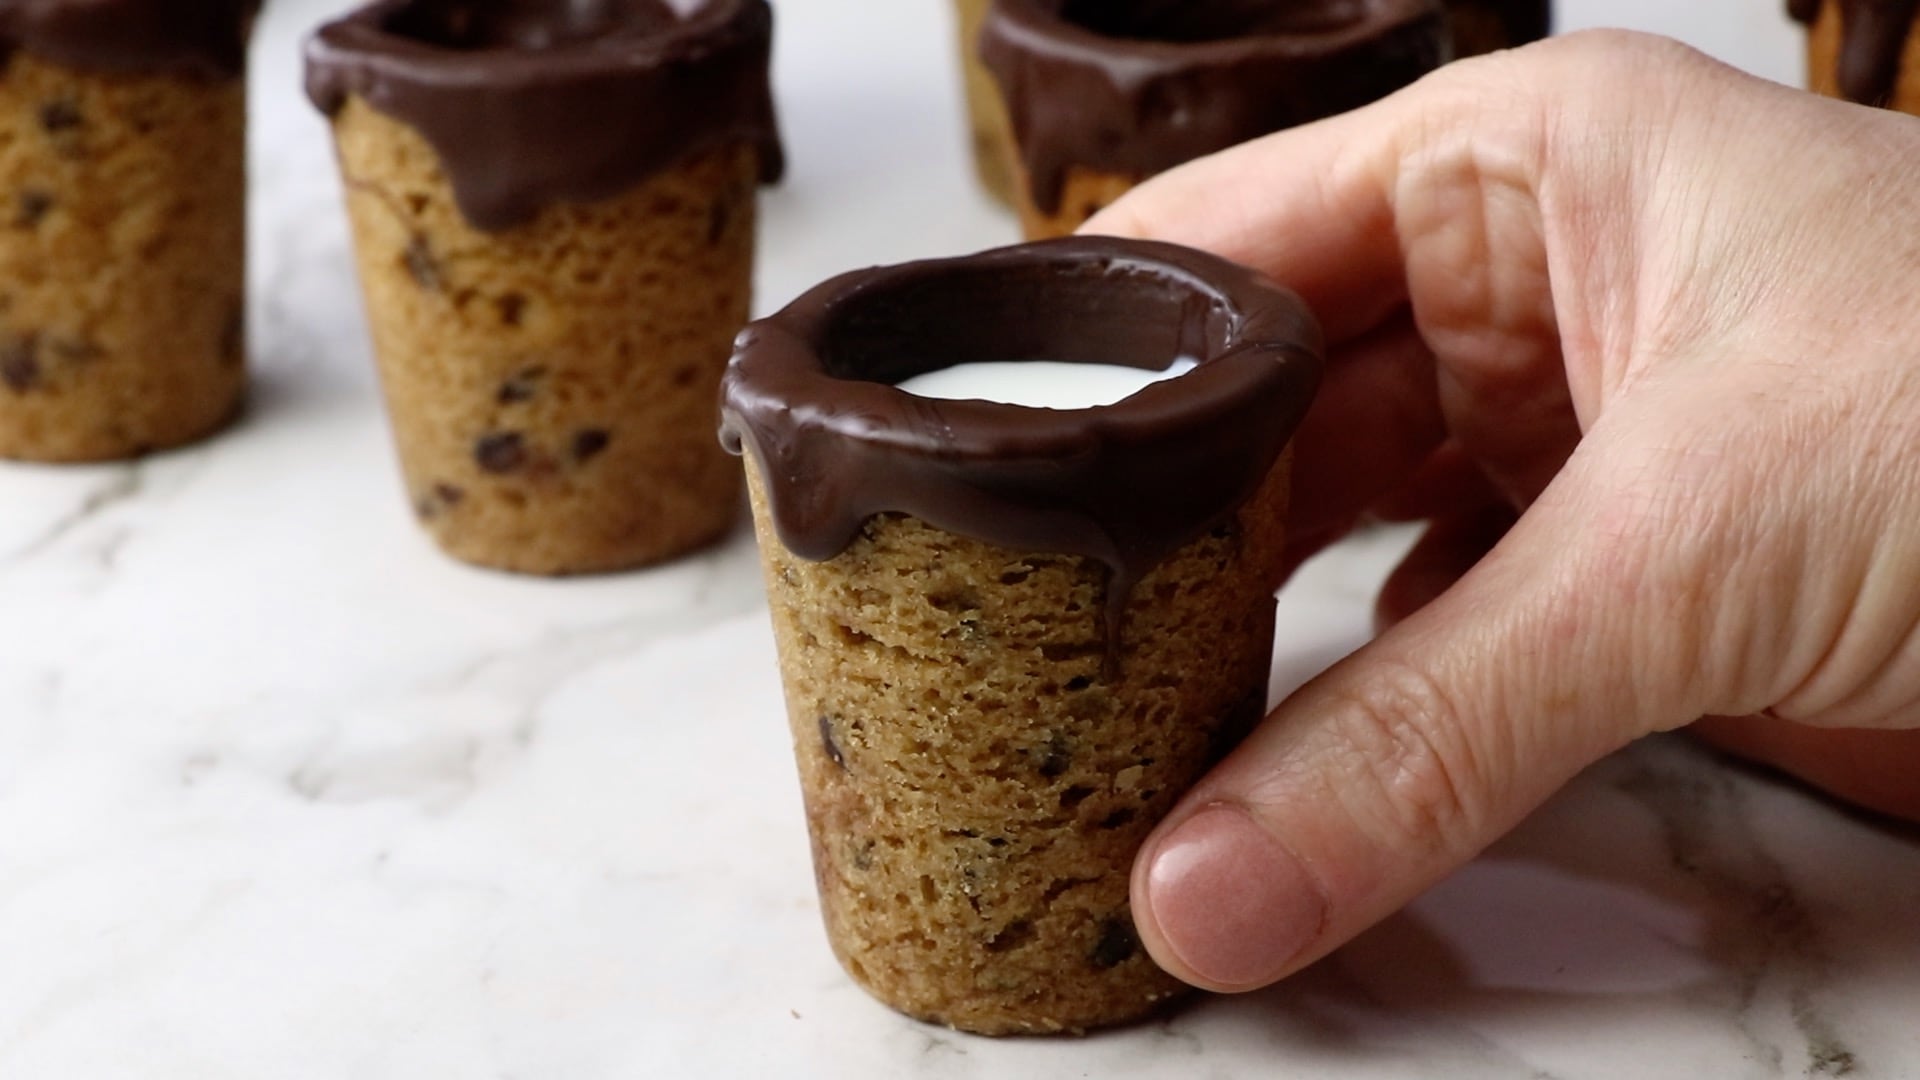 How to Make Milk-Filled Cookie Cups & Shot Glasses at Home « Food